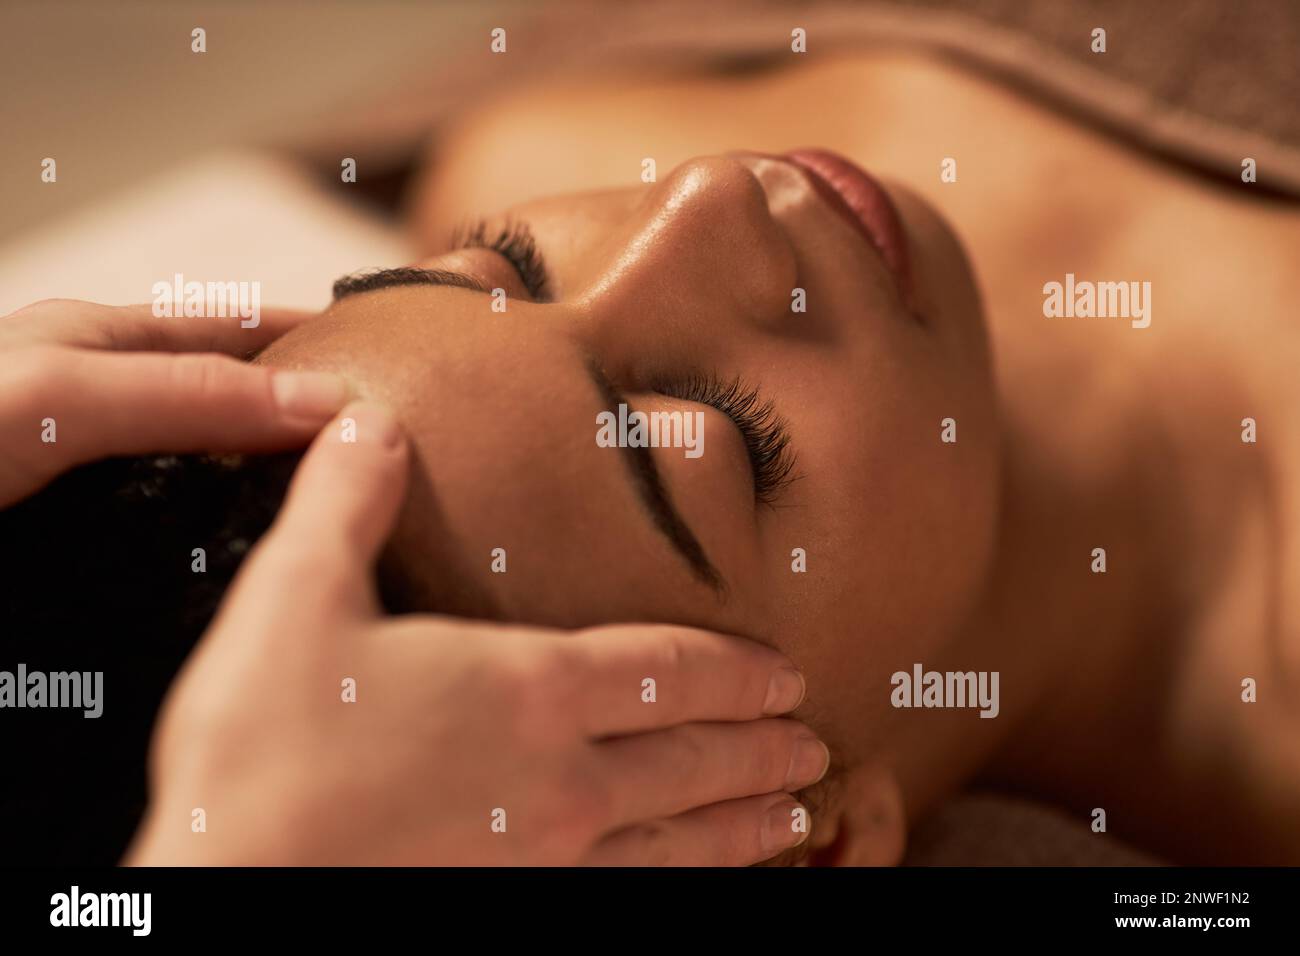 Young woman receiving face massage to get glowing and firm complexion Stock Photo